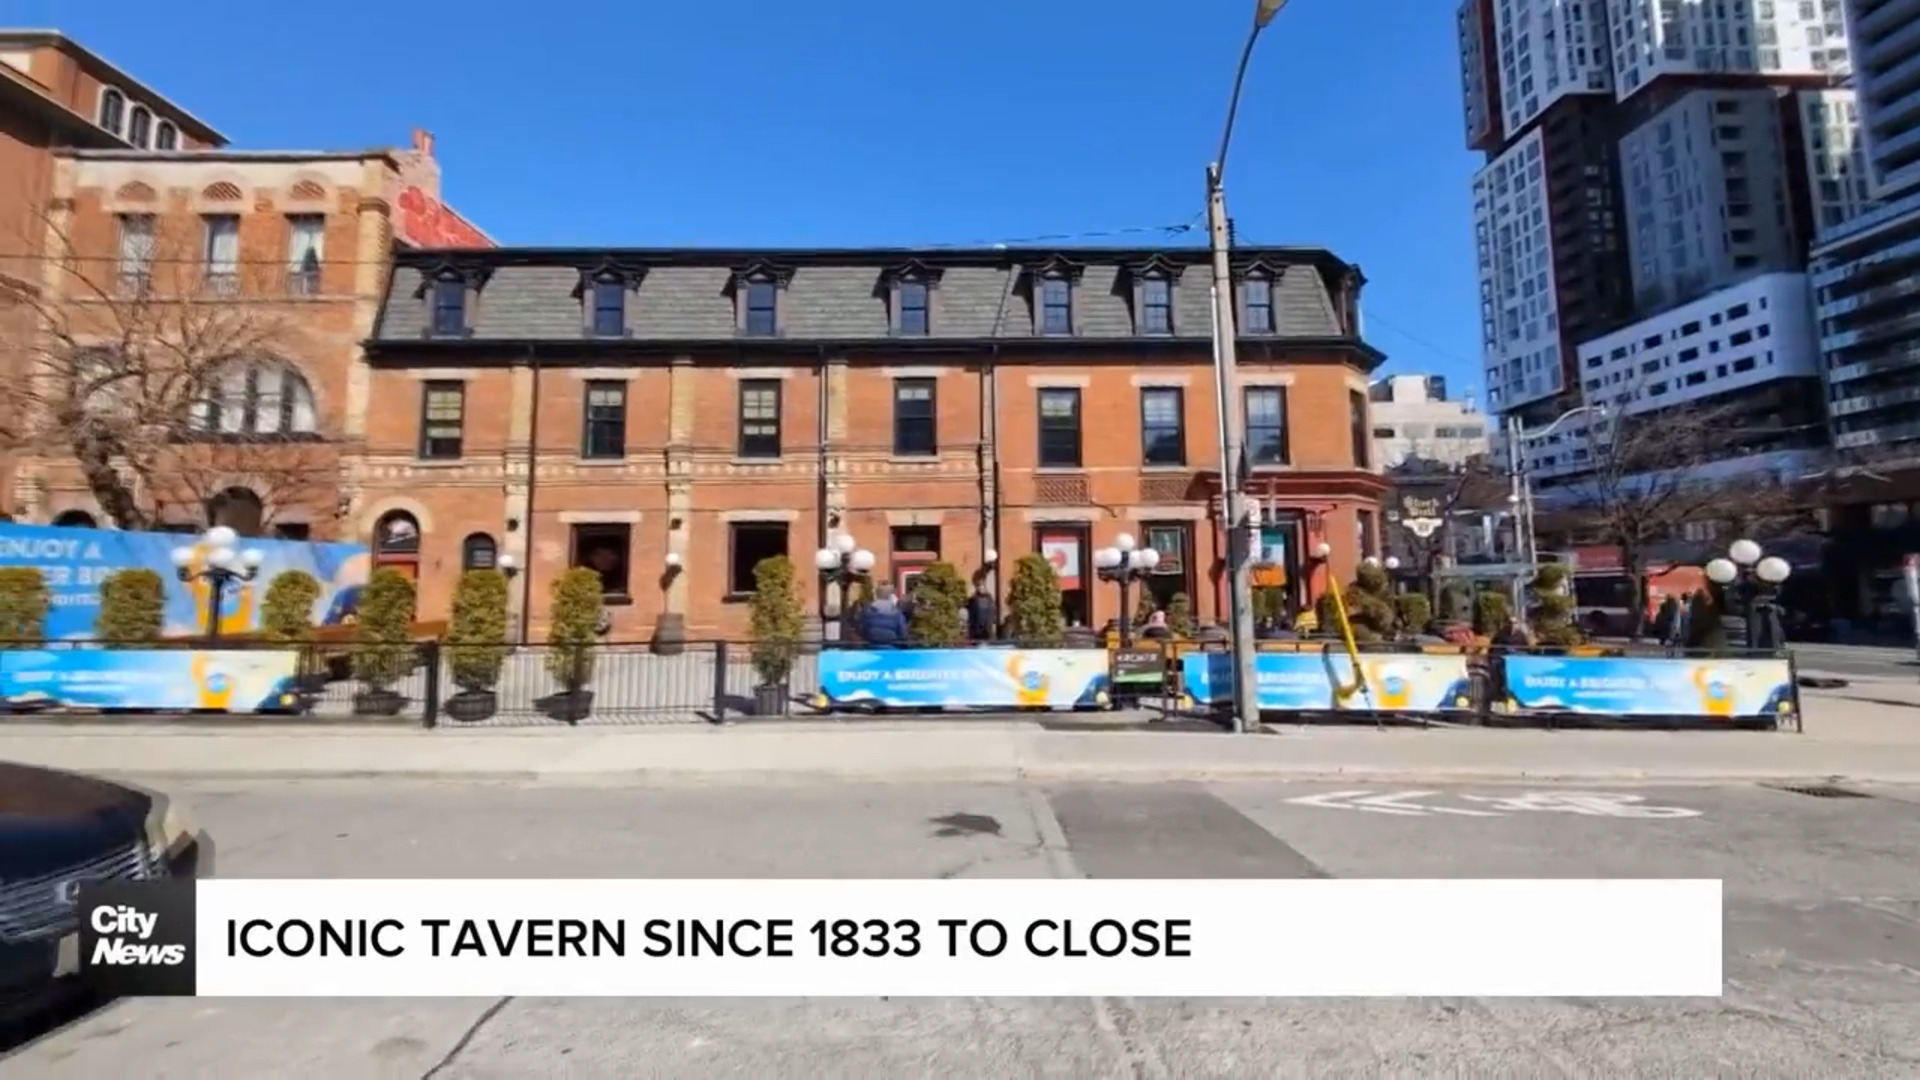 Last call for nearly 200 year old Toronto pub